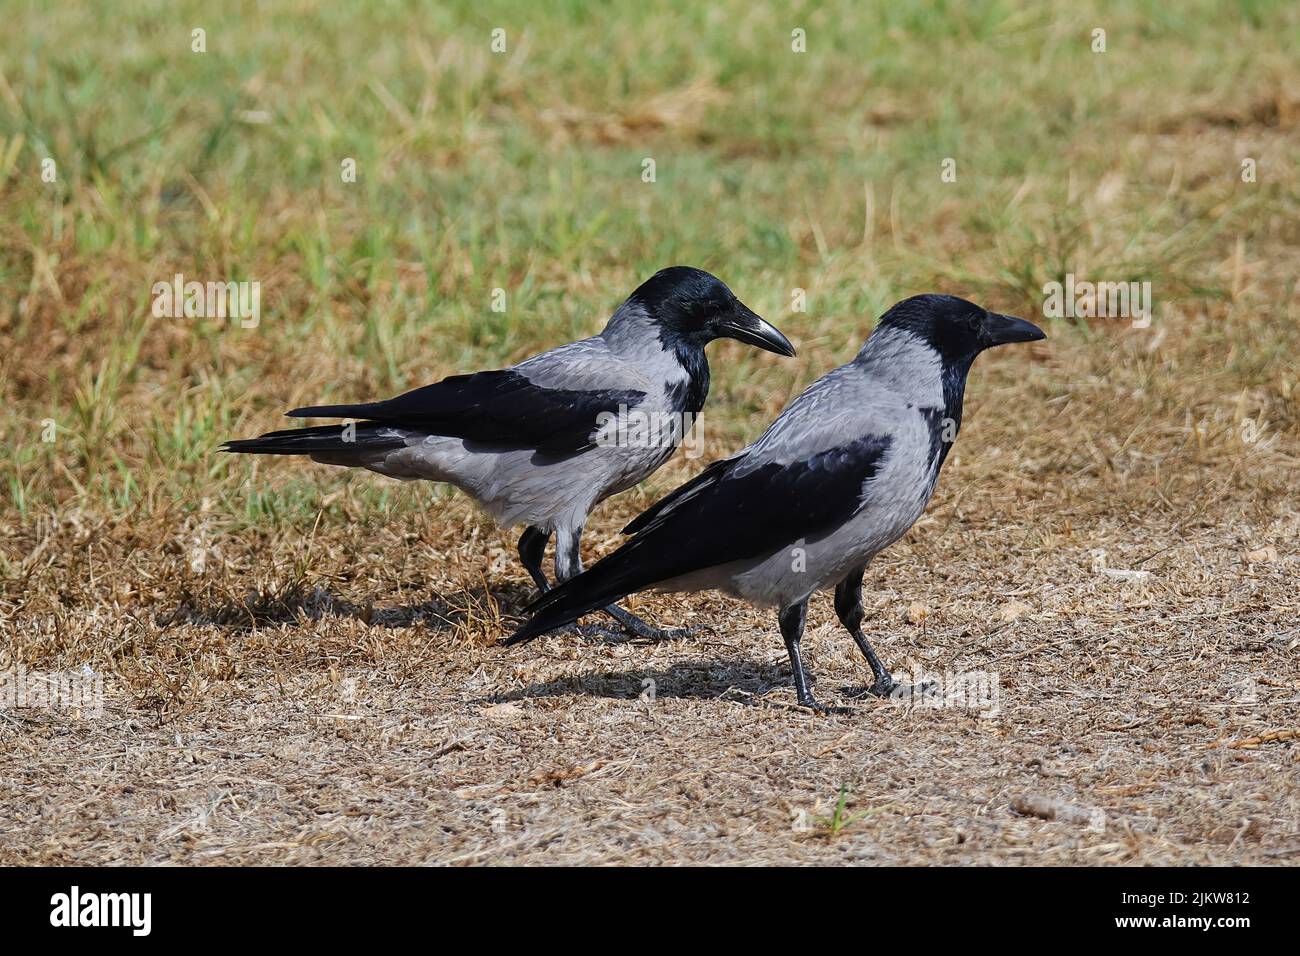 A couple of gray crows on a field under a sunny day Stock Photo